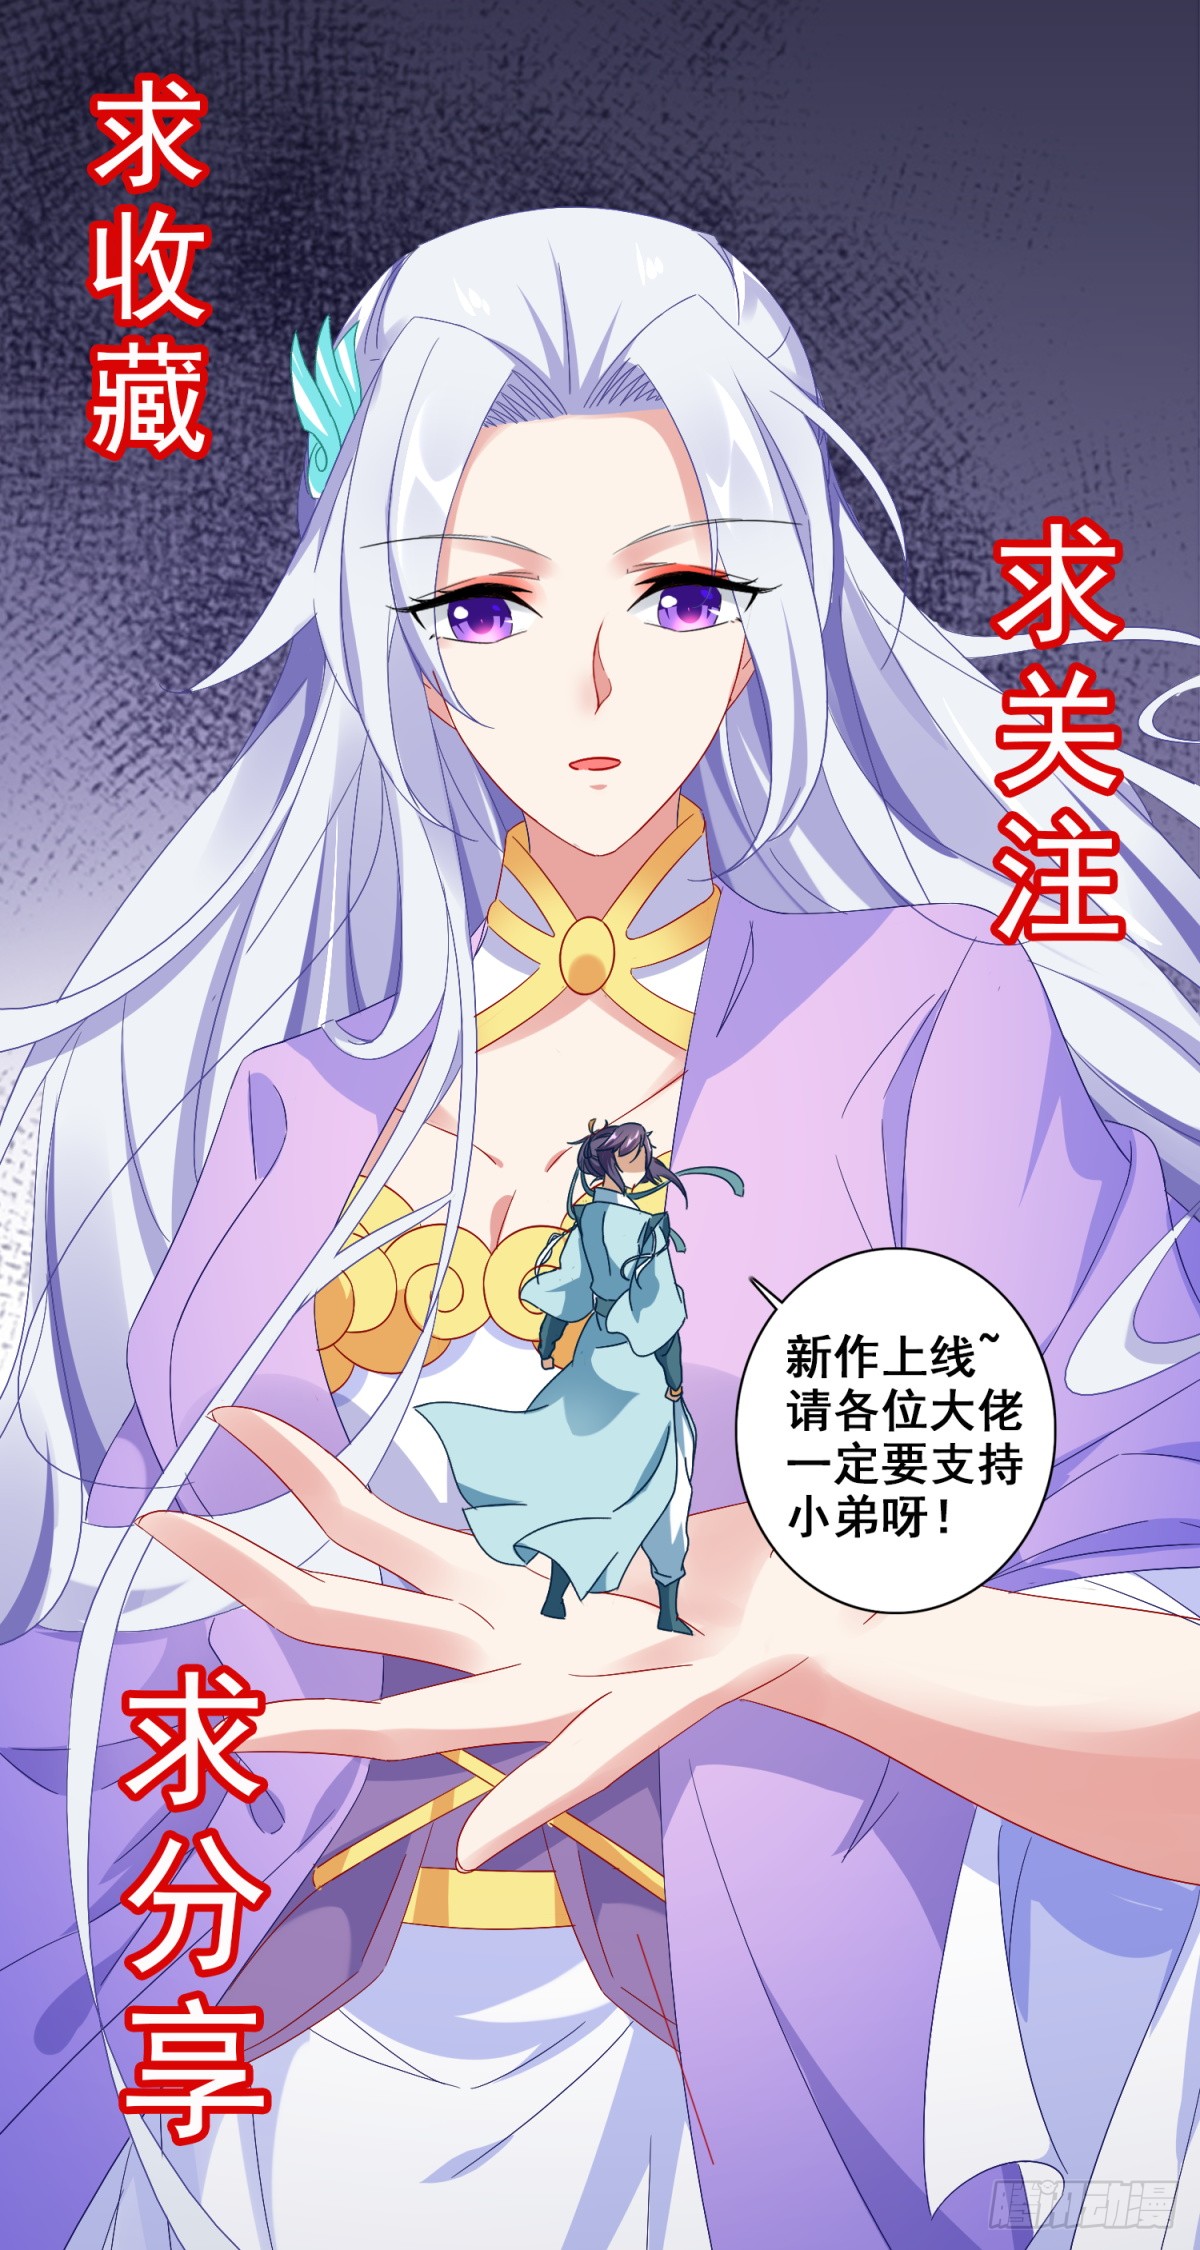 Divine Soul Emperor Ch. 10 I Want To Be Stronger Quickly